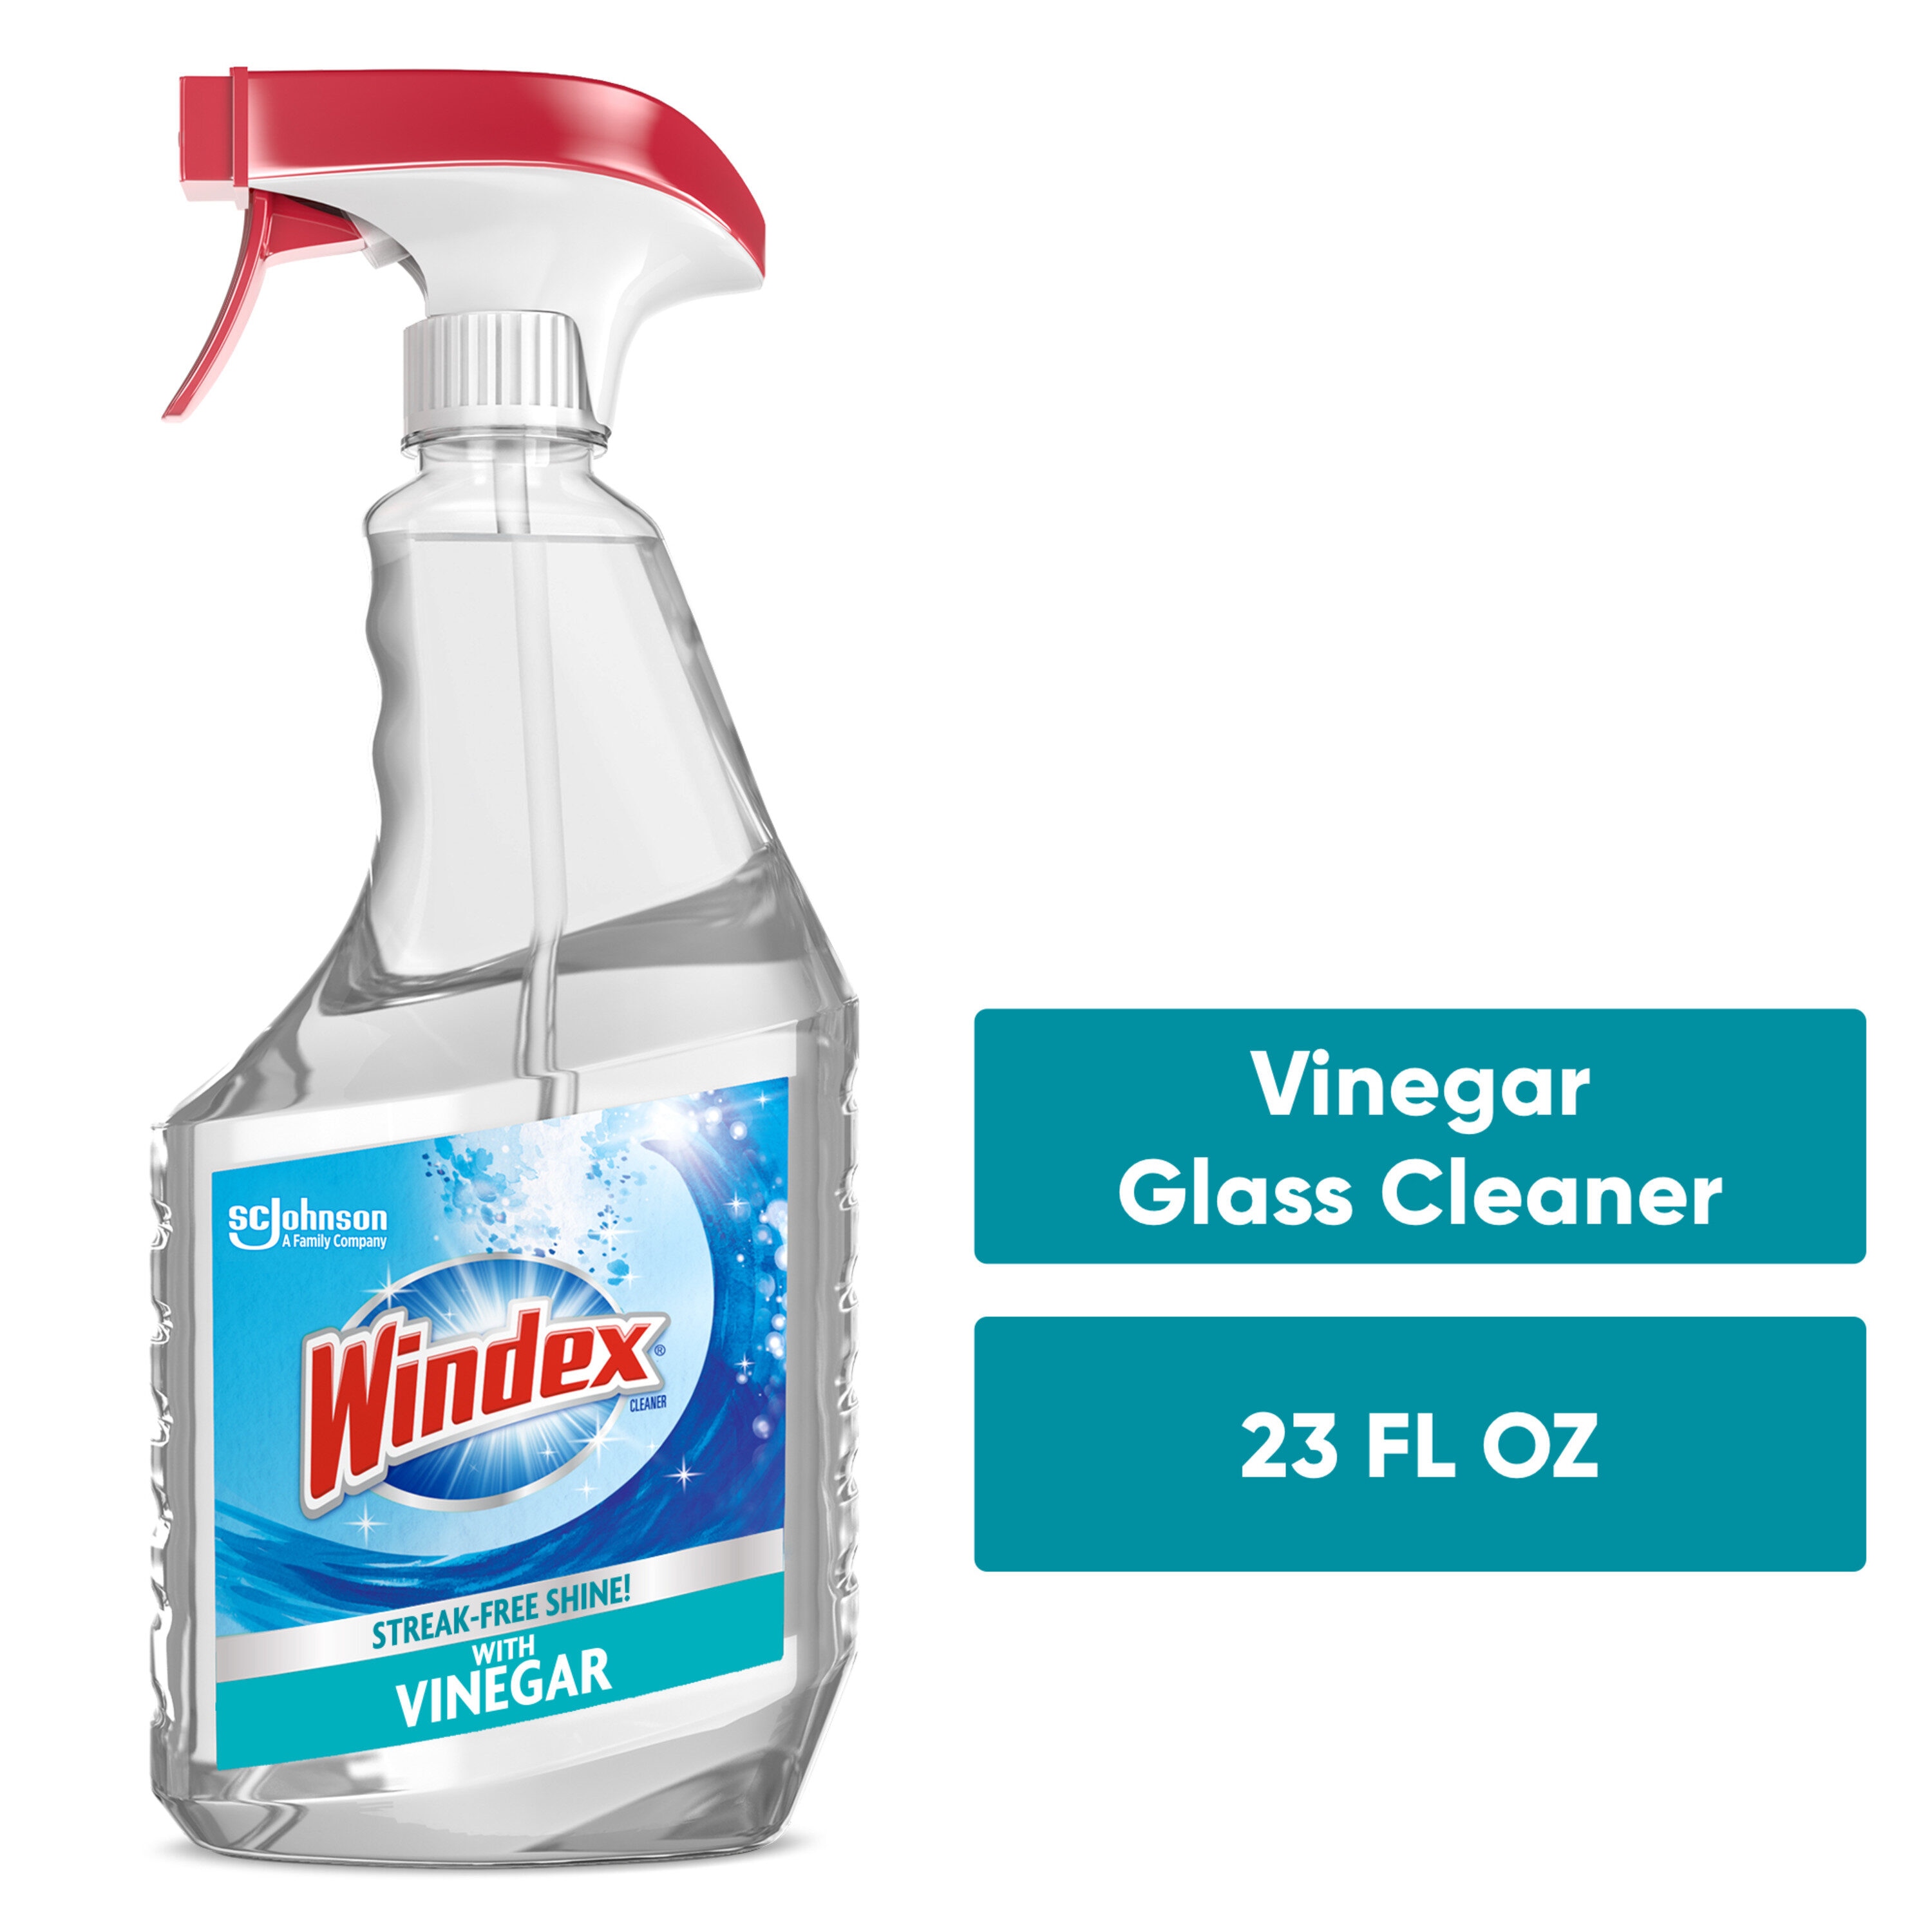 Invisible Glass 22 Fluid Ounces Pump Spray Glass Cleaner